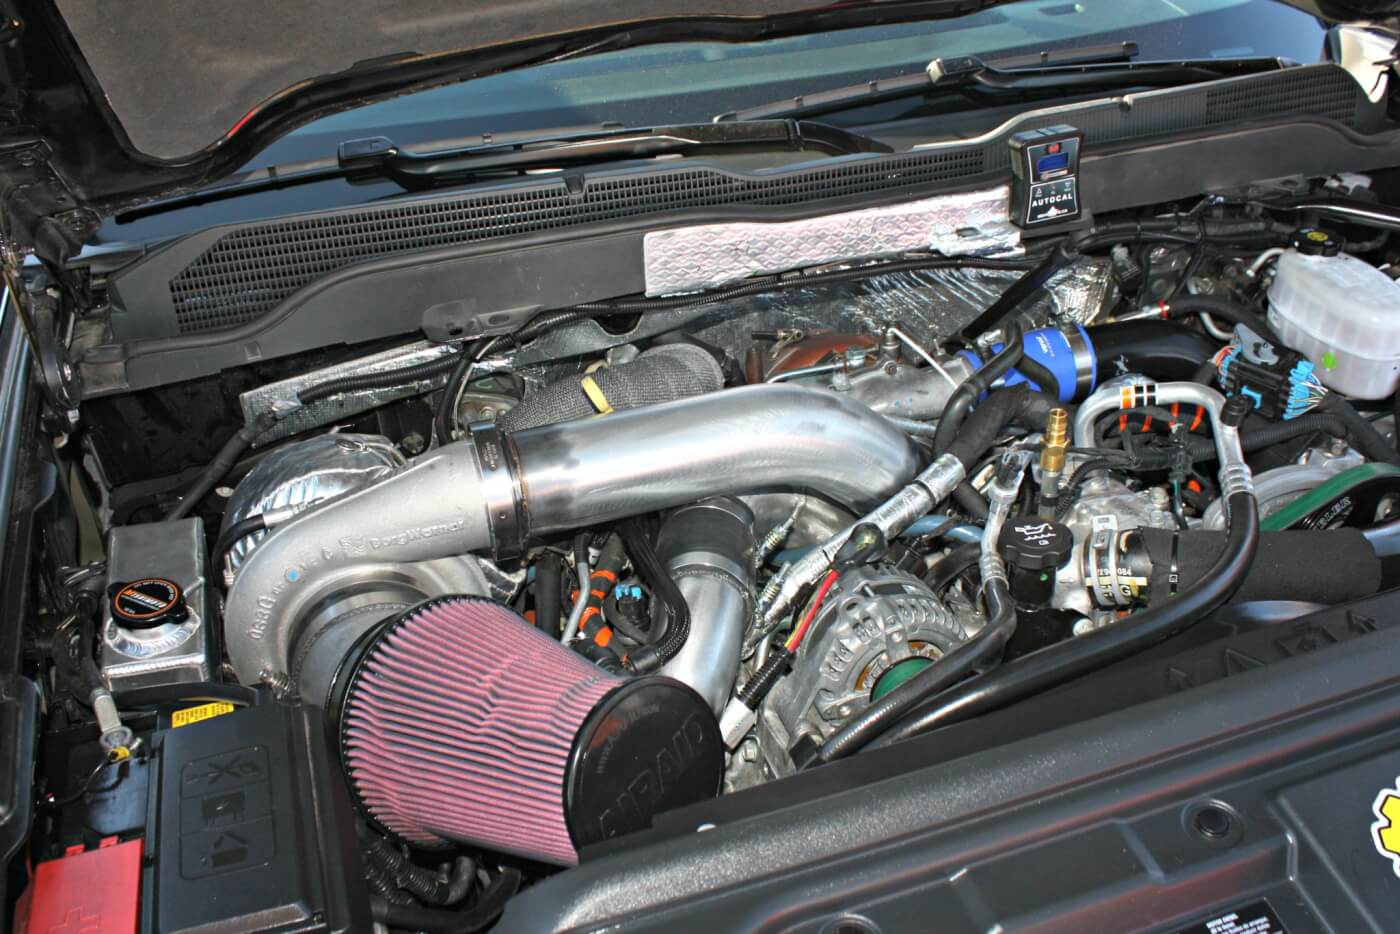 Under the hood of Alligator’s latest project, a 2015 Chevrolet, you’ll find the perfect recipe to a 650-hp Duramax. MotorOps tuning, ATS Diesel Dual Fueler kit and a Deviant Race Parts S475 compound turbo kit. Anyone else think this is the way they should come right off the GM assembly line?